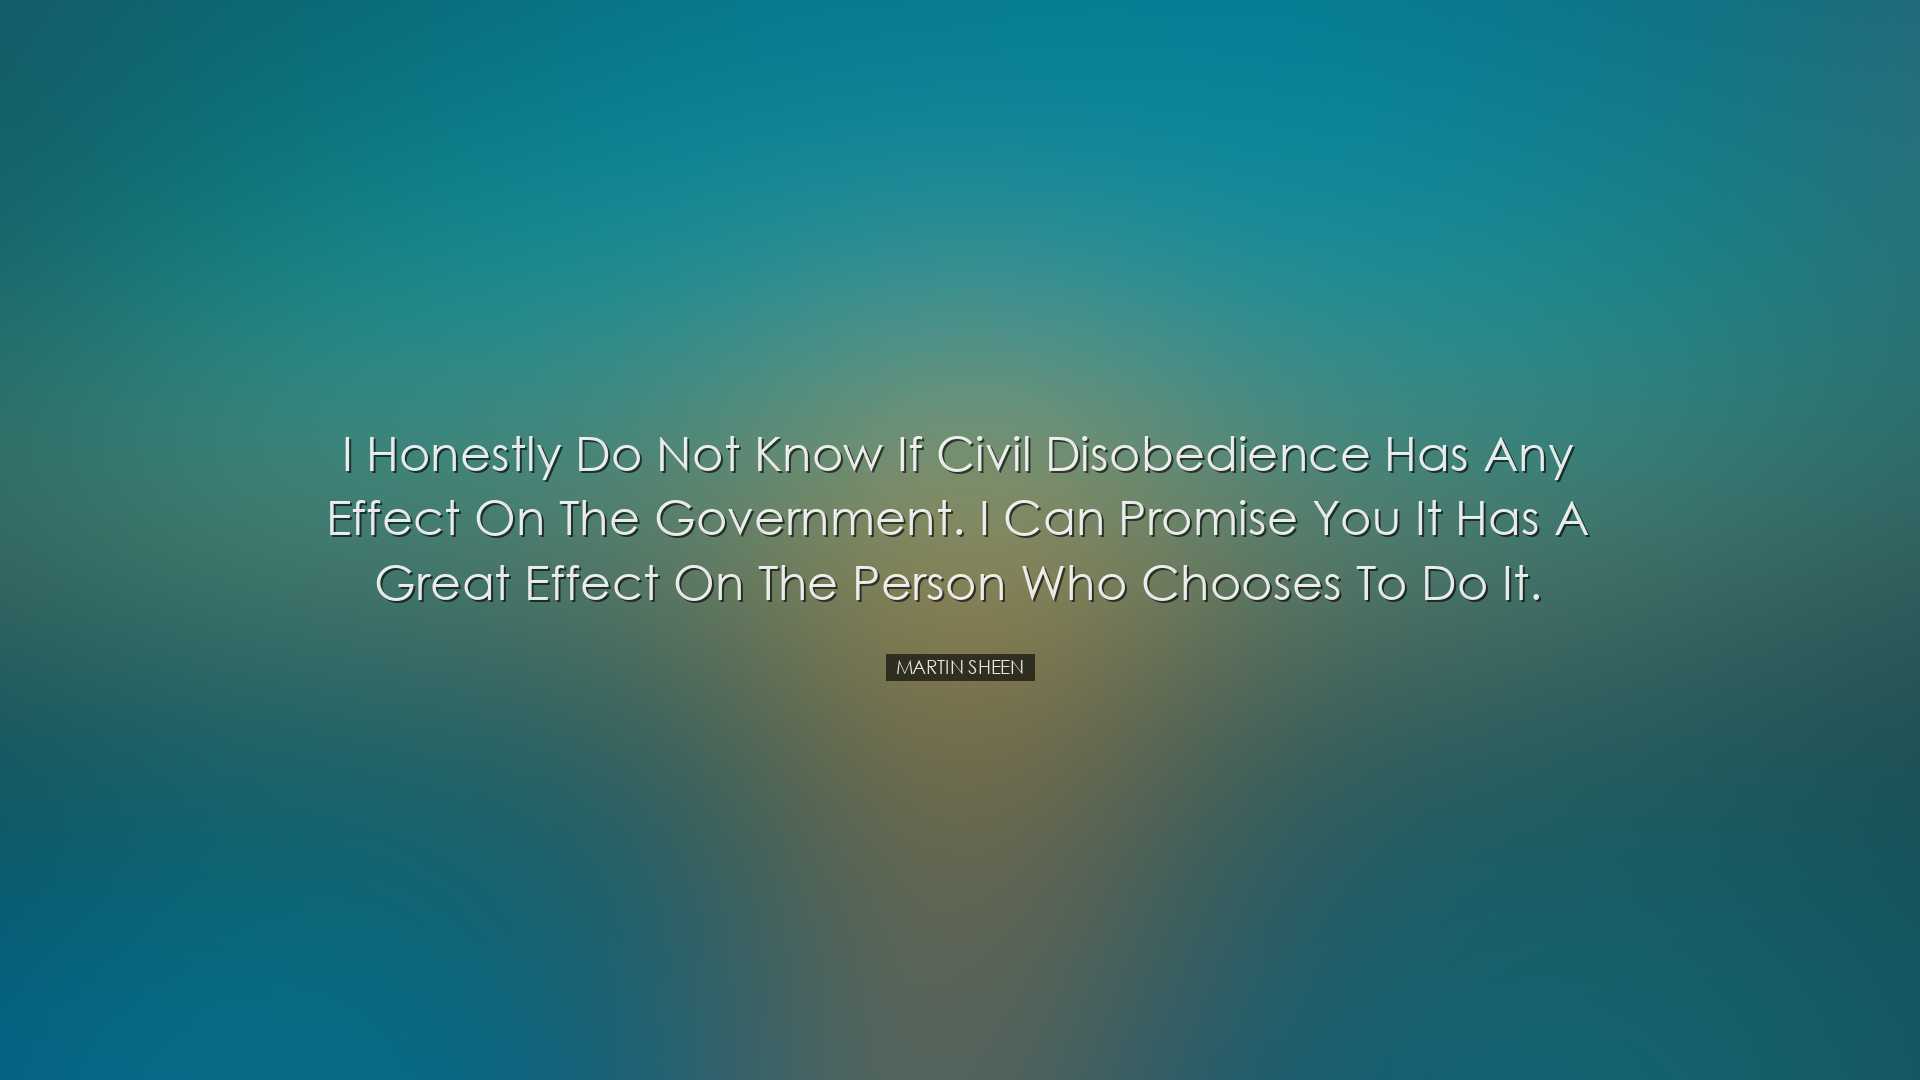 I honestly do not know if civil disobedience has any effect on the